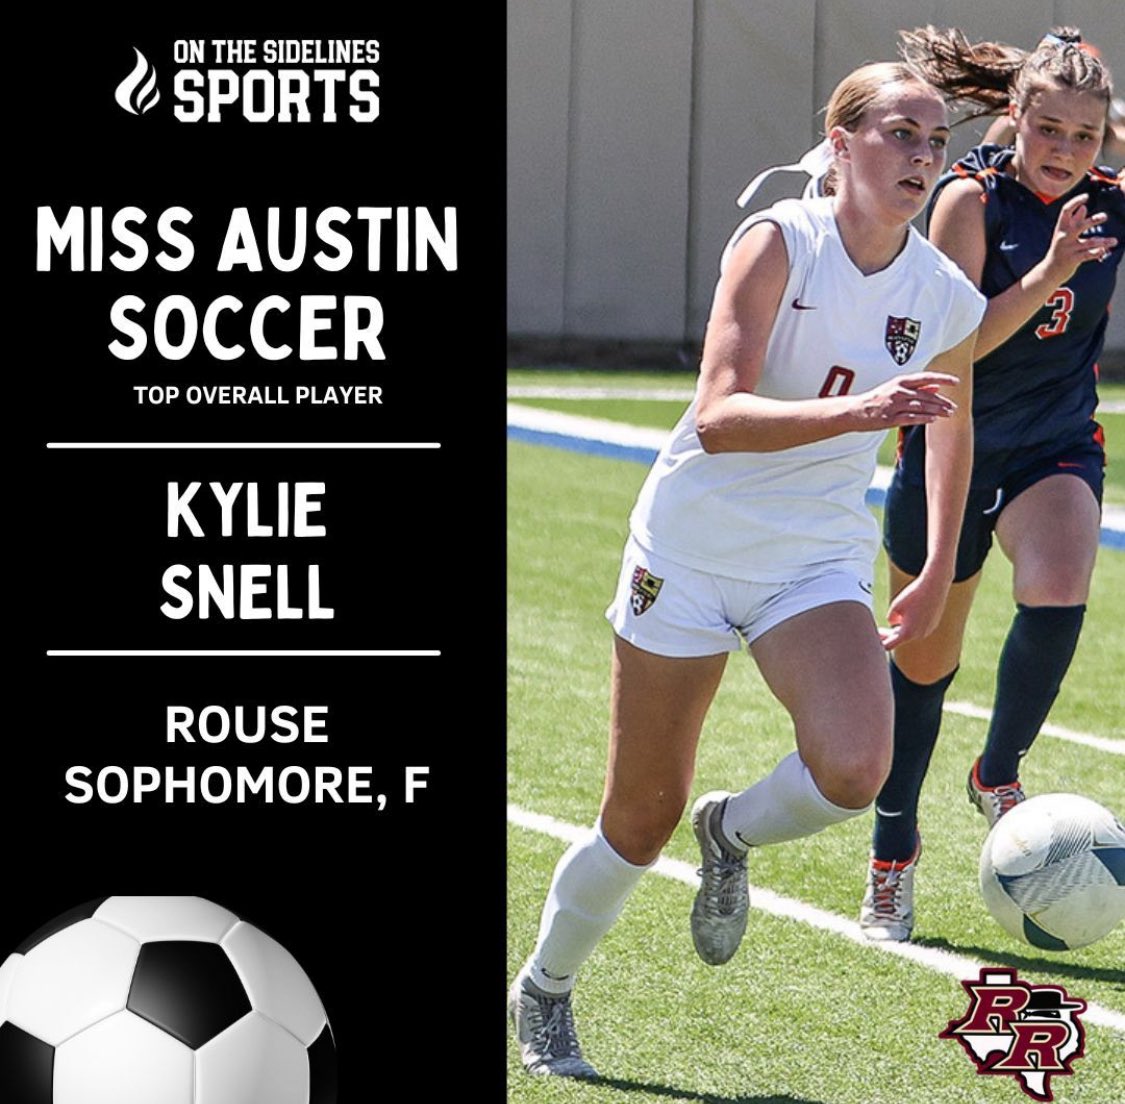 Congrats to our very own @KylieSnell4 named Miss Austin Soccer!!! Shoutouts to @MeredithKoltz @KateWyrick07 @ameliaclark2026 for being named to the all Austin Metro Soccer Teams for 6A and 5A and finally to @BreckynFerrell and @EmieBenson for Honorable mention!! @sting_austin